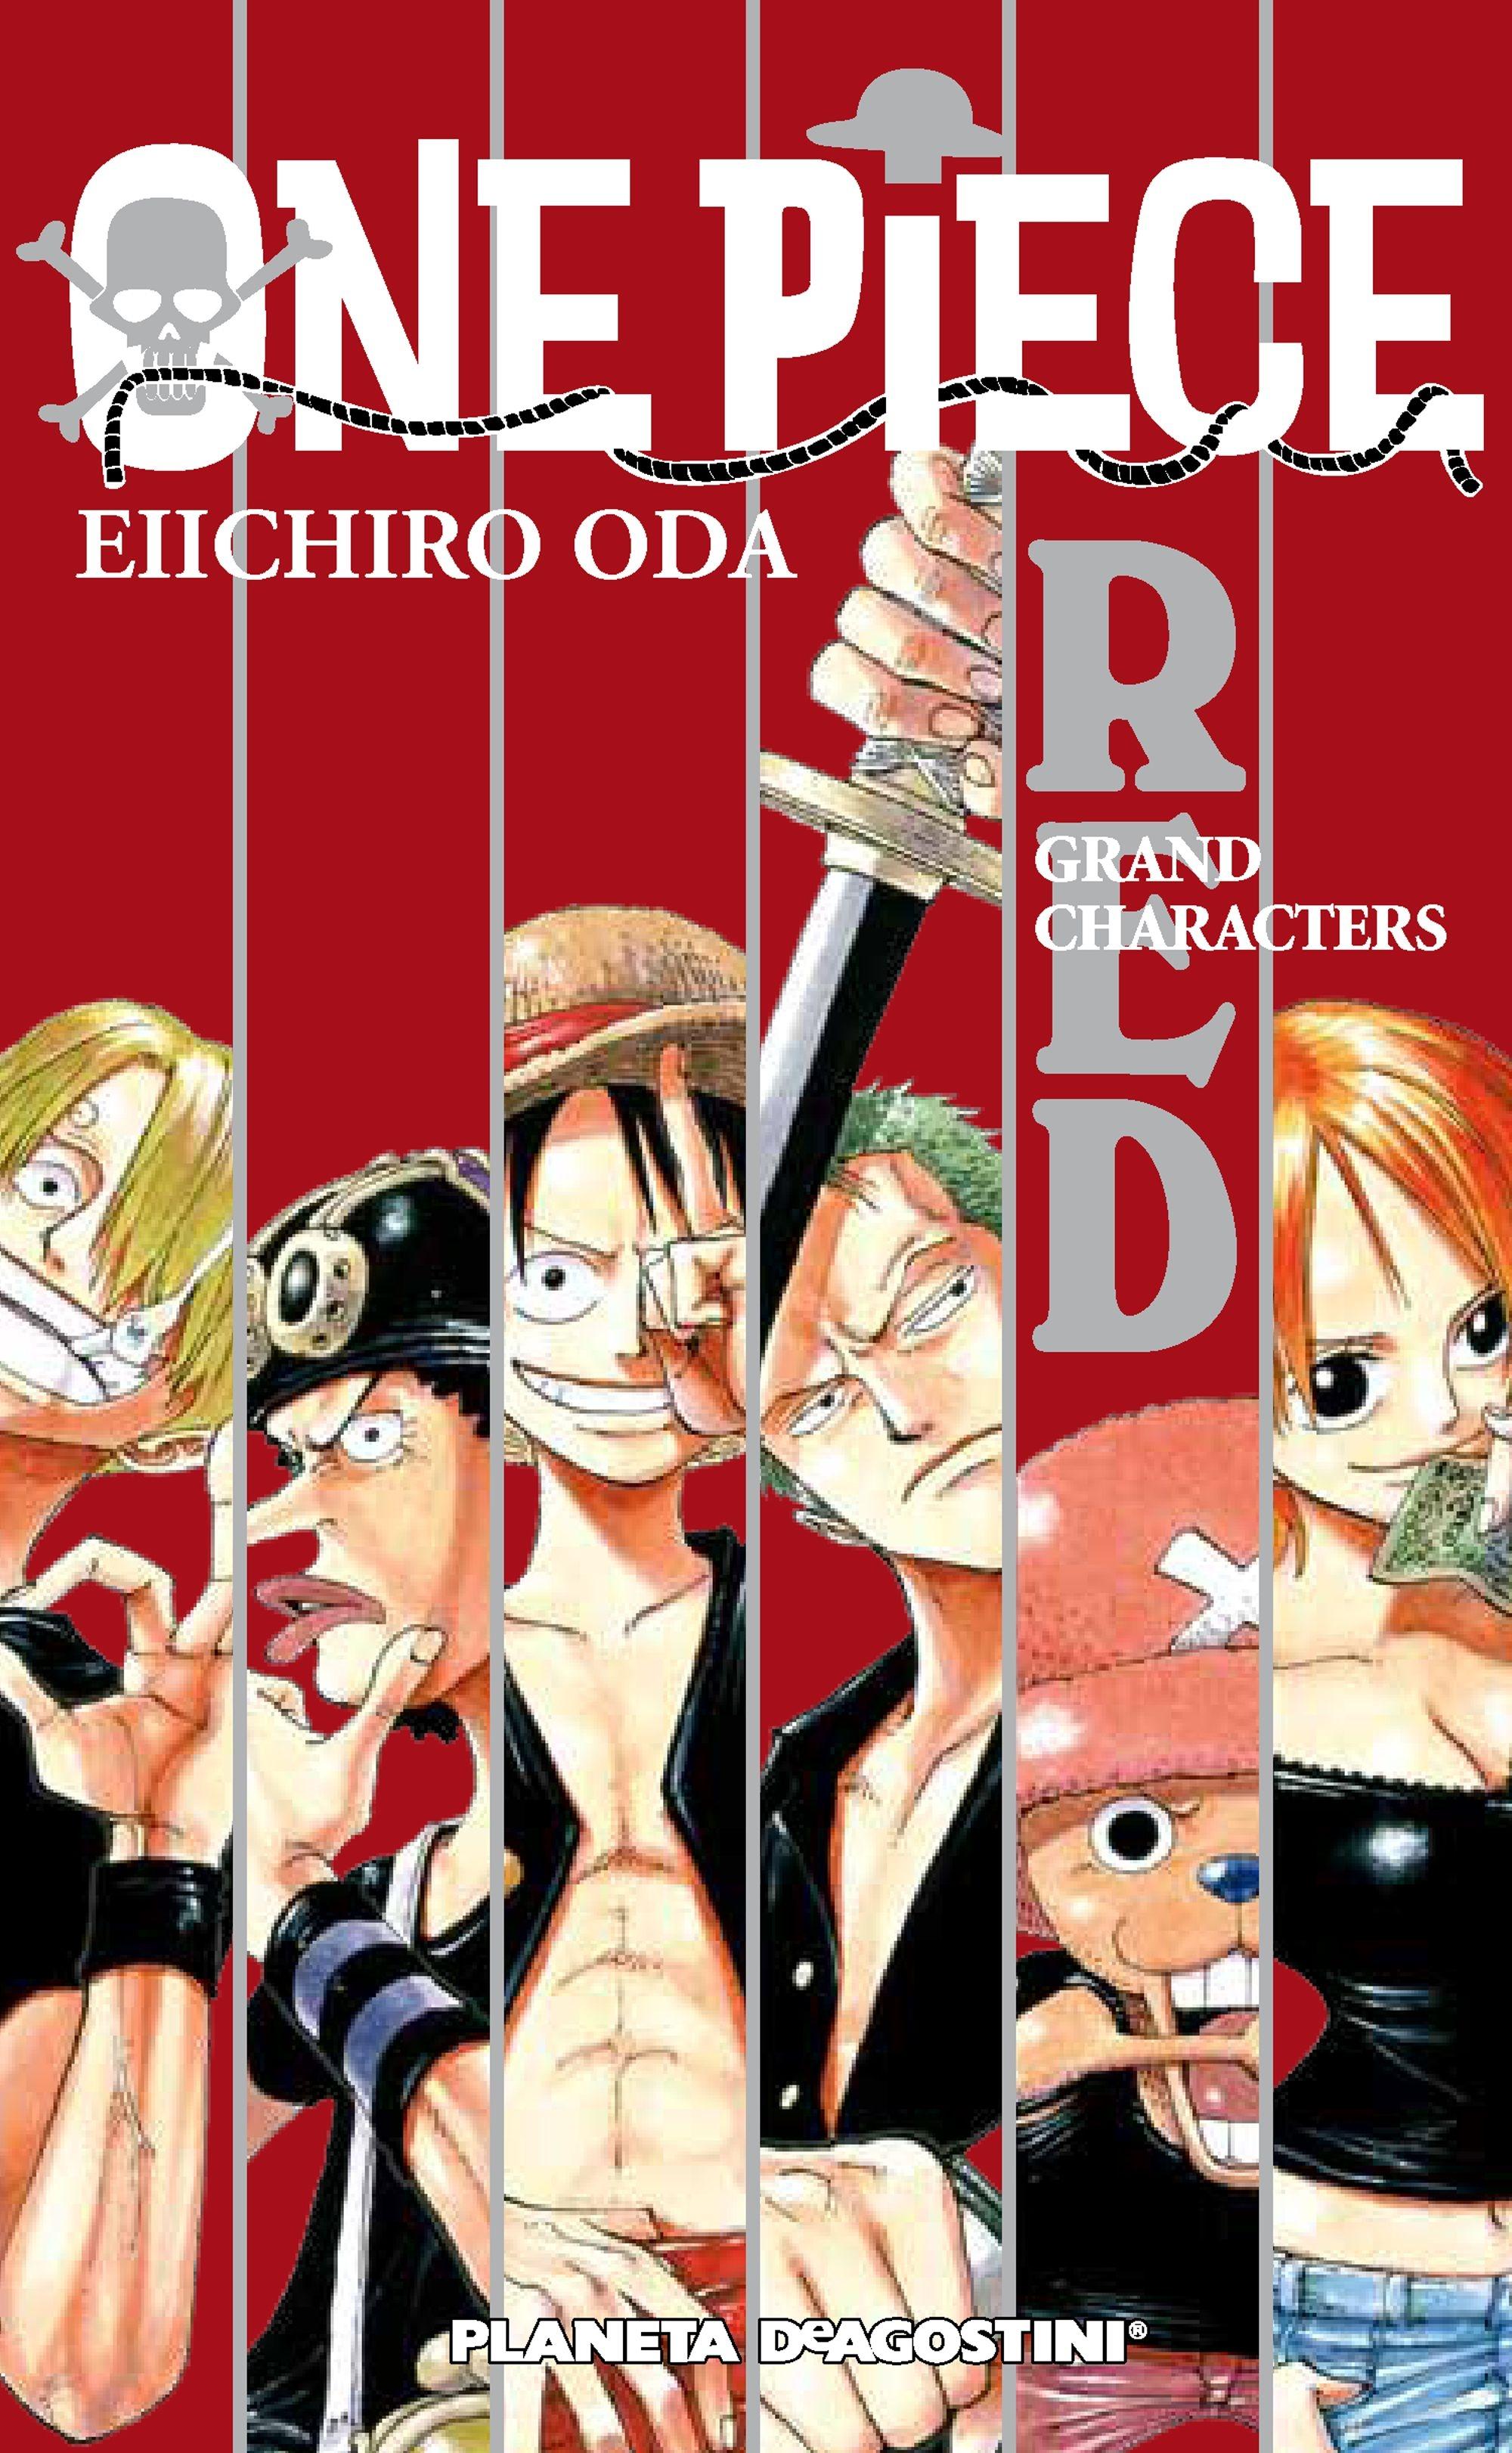 One Piece Guía Nº 01 Red "Gran Characters". 